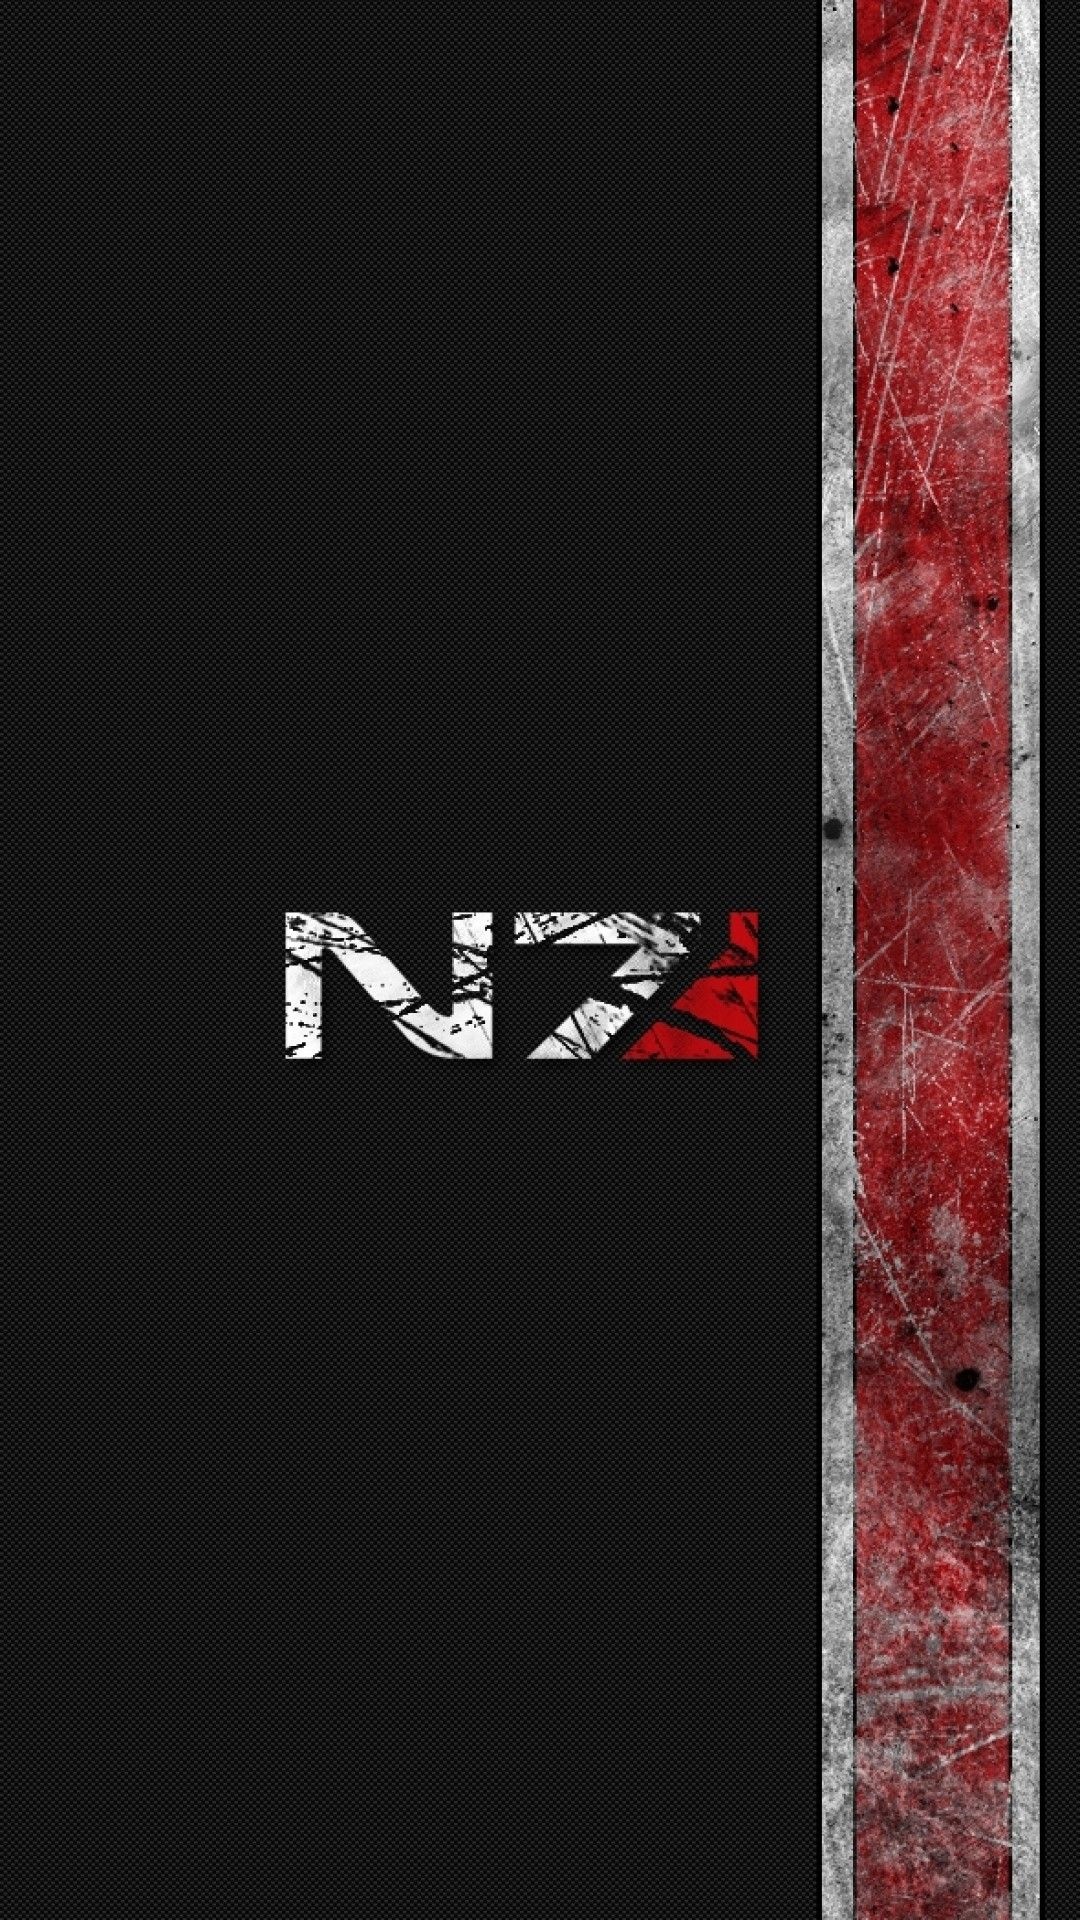 Mass Effect, Phone wallpapers, Unique designs, Must-have for fans, 1080x1920 Full HD Phone